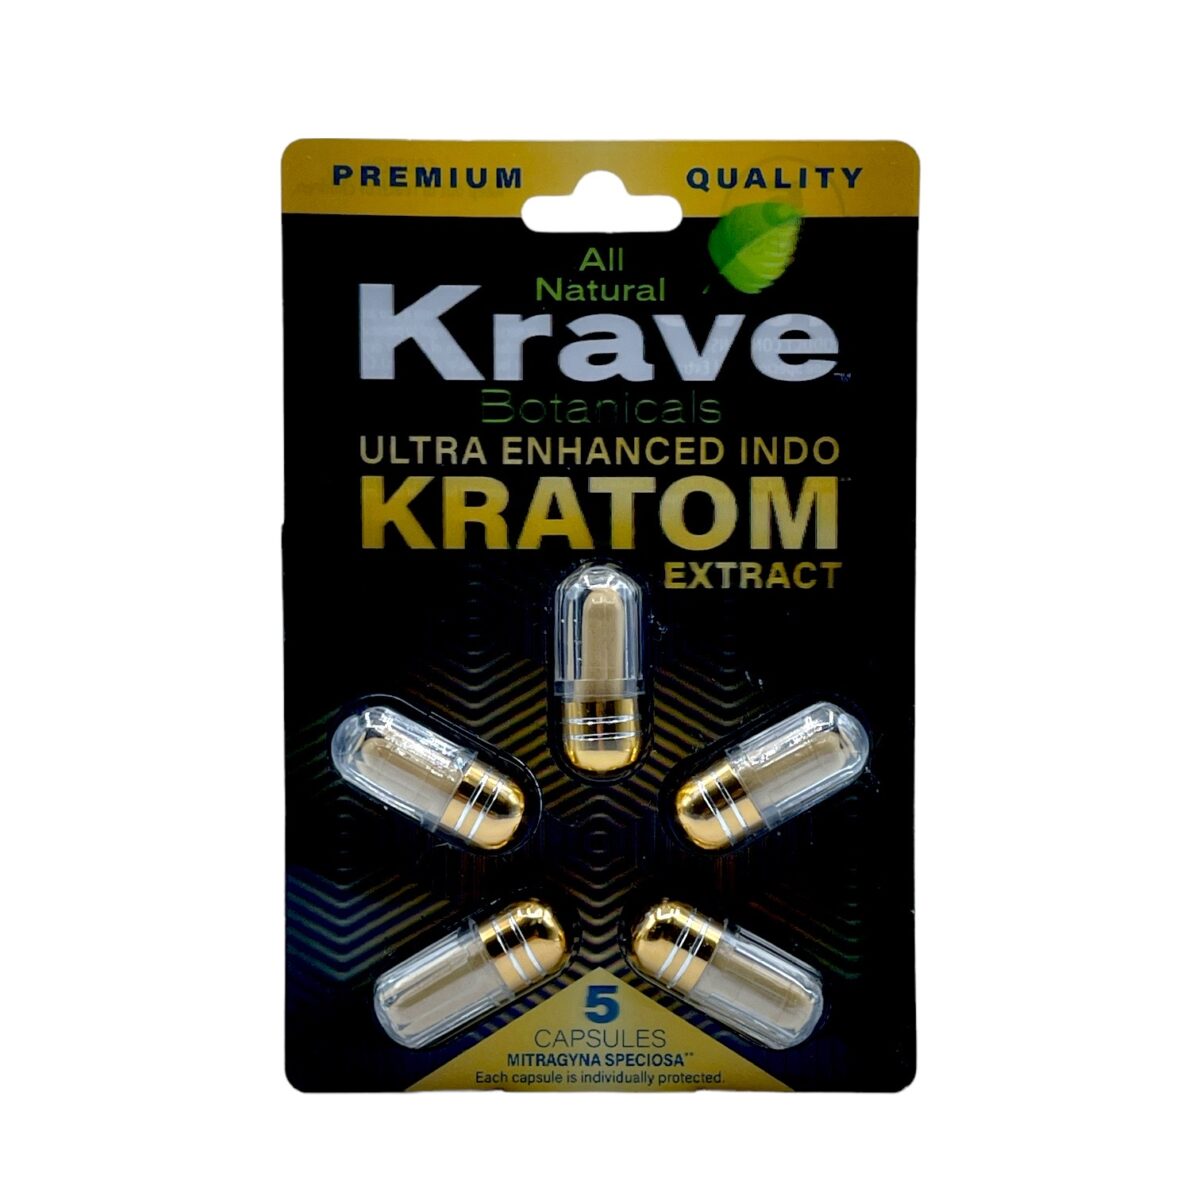 Krave Ultra Enhanced Indo Kratom Extract – 5 count